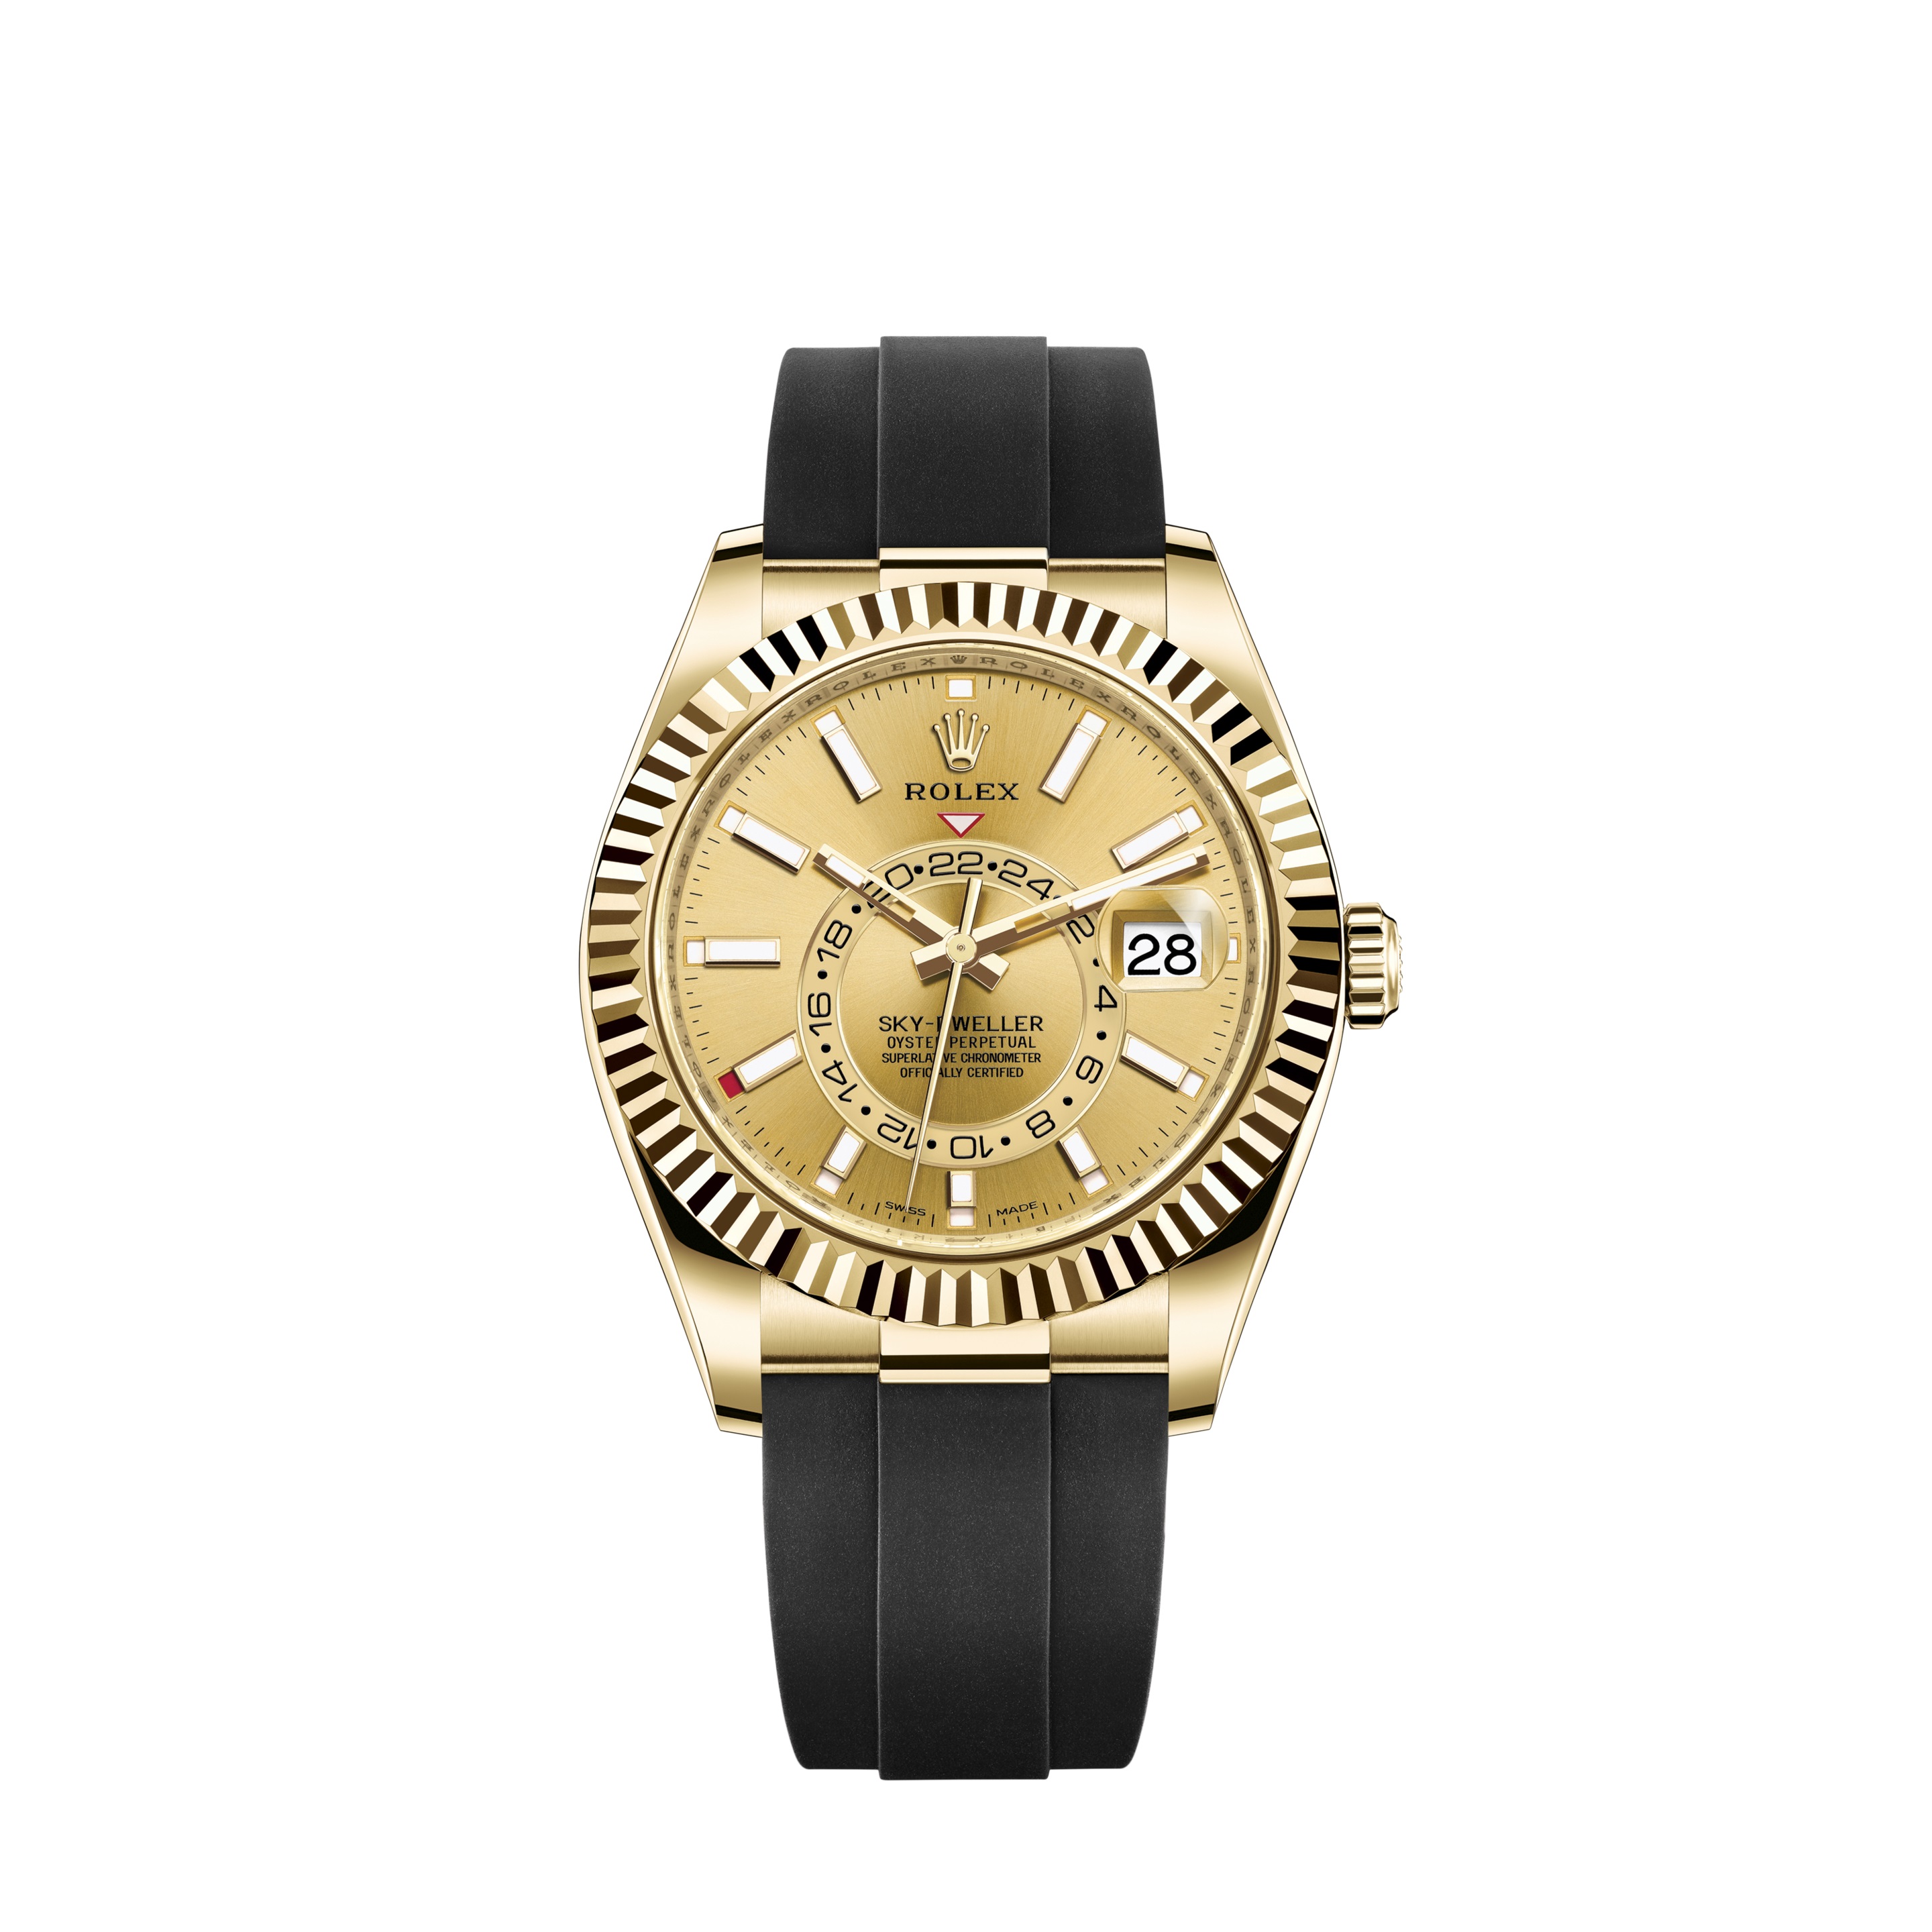 Sky-Dweller 326238 Yellow Gold Watch (Champagne-colour)